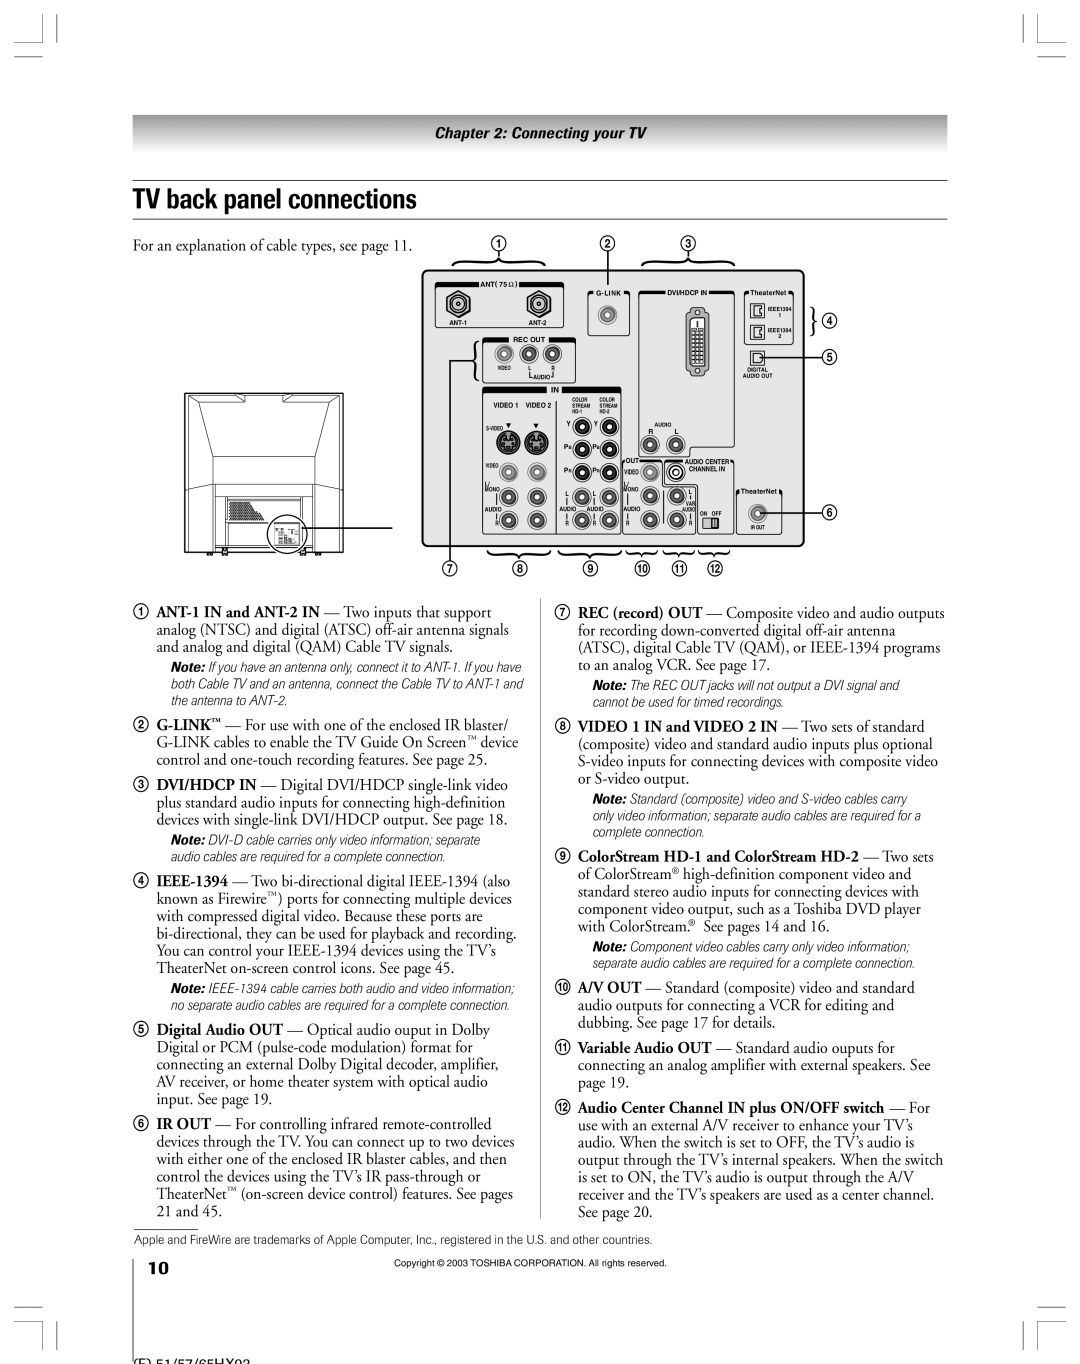 Toshiba 51HX93 owner manual TV back panel connections 